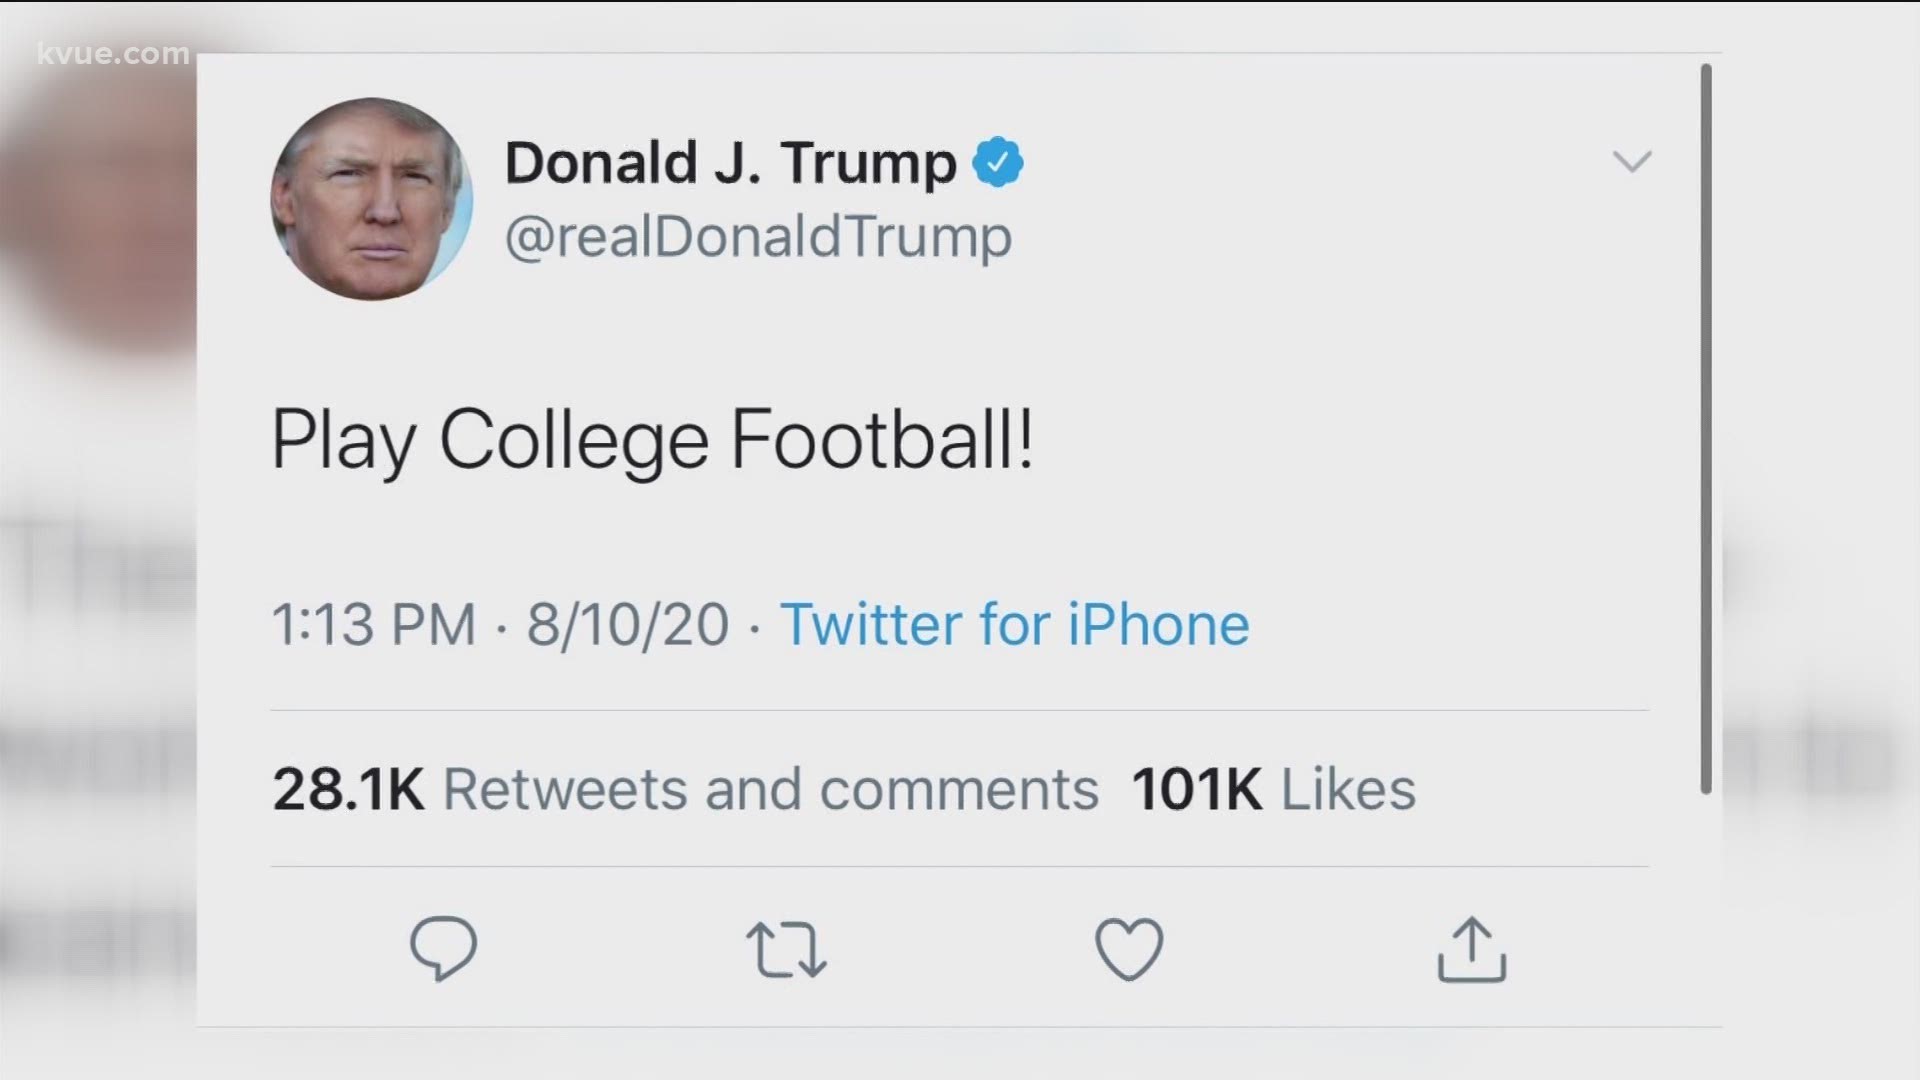 Student-athletes are once again using their social media platforms to speak up and voice their opinions. This time, on whether or not college football should happen.